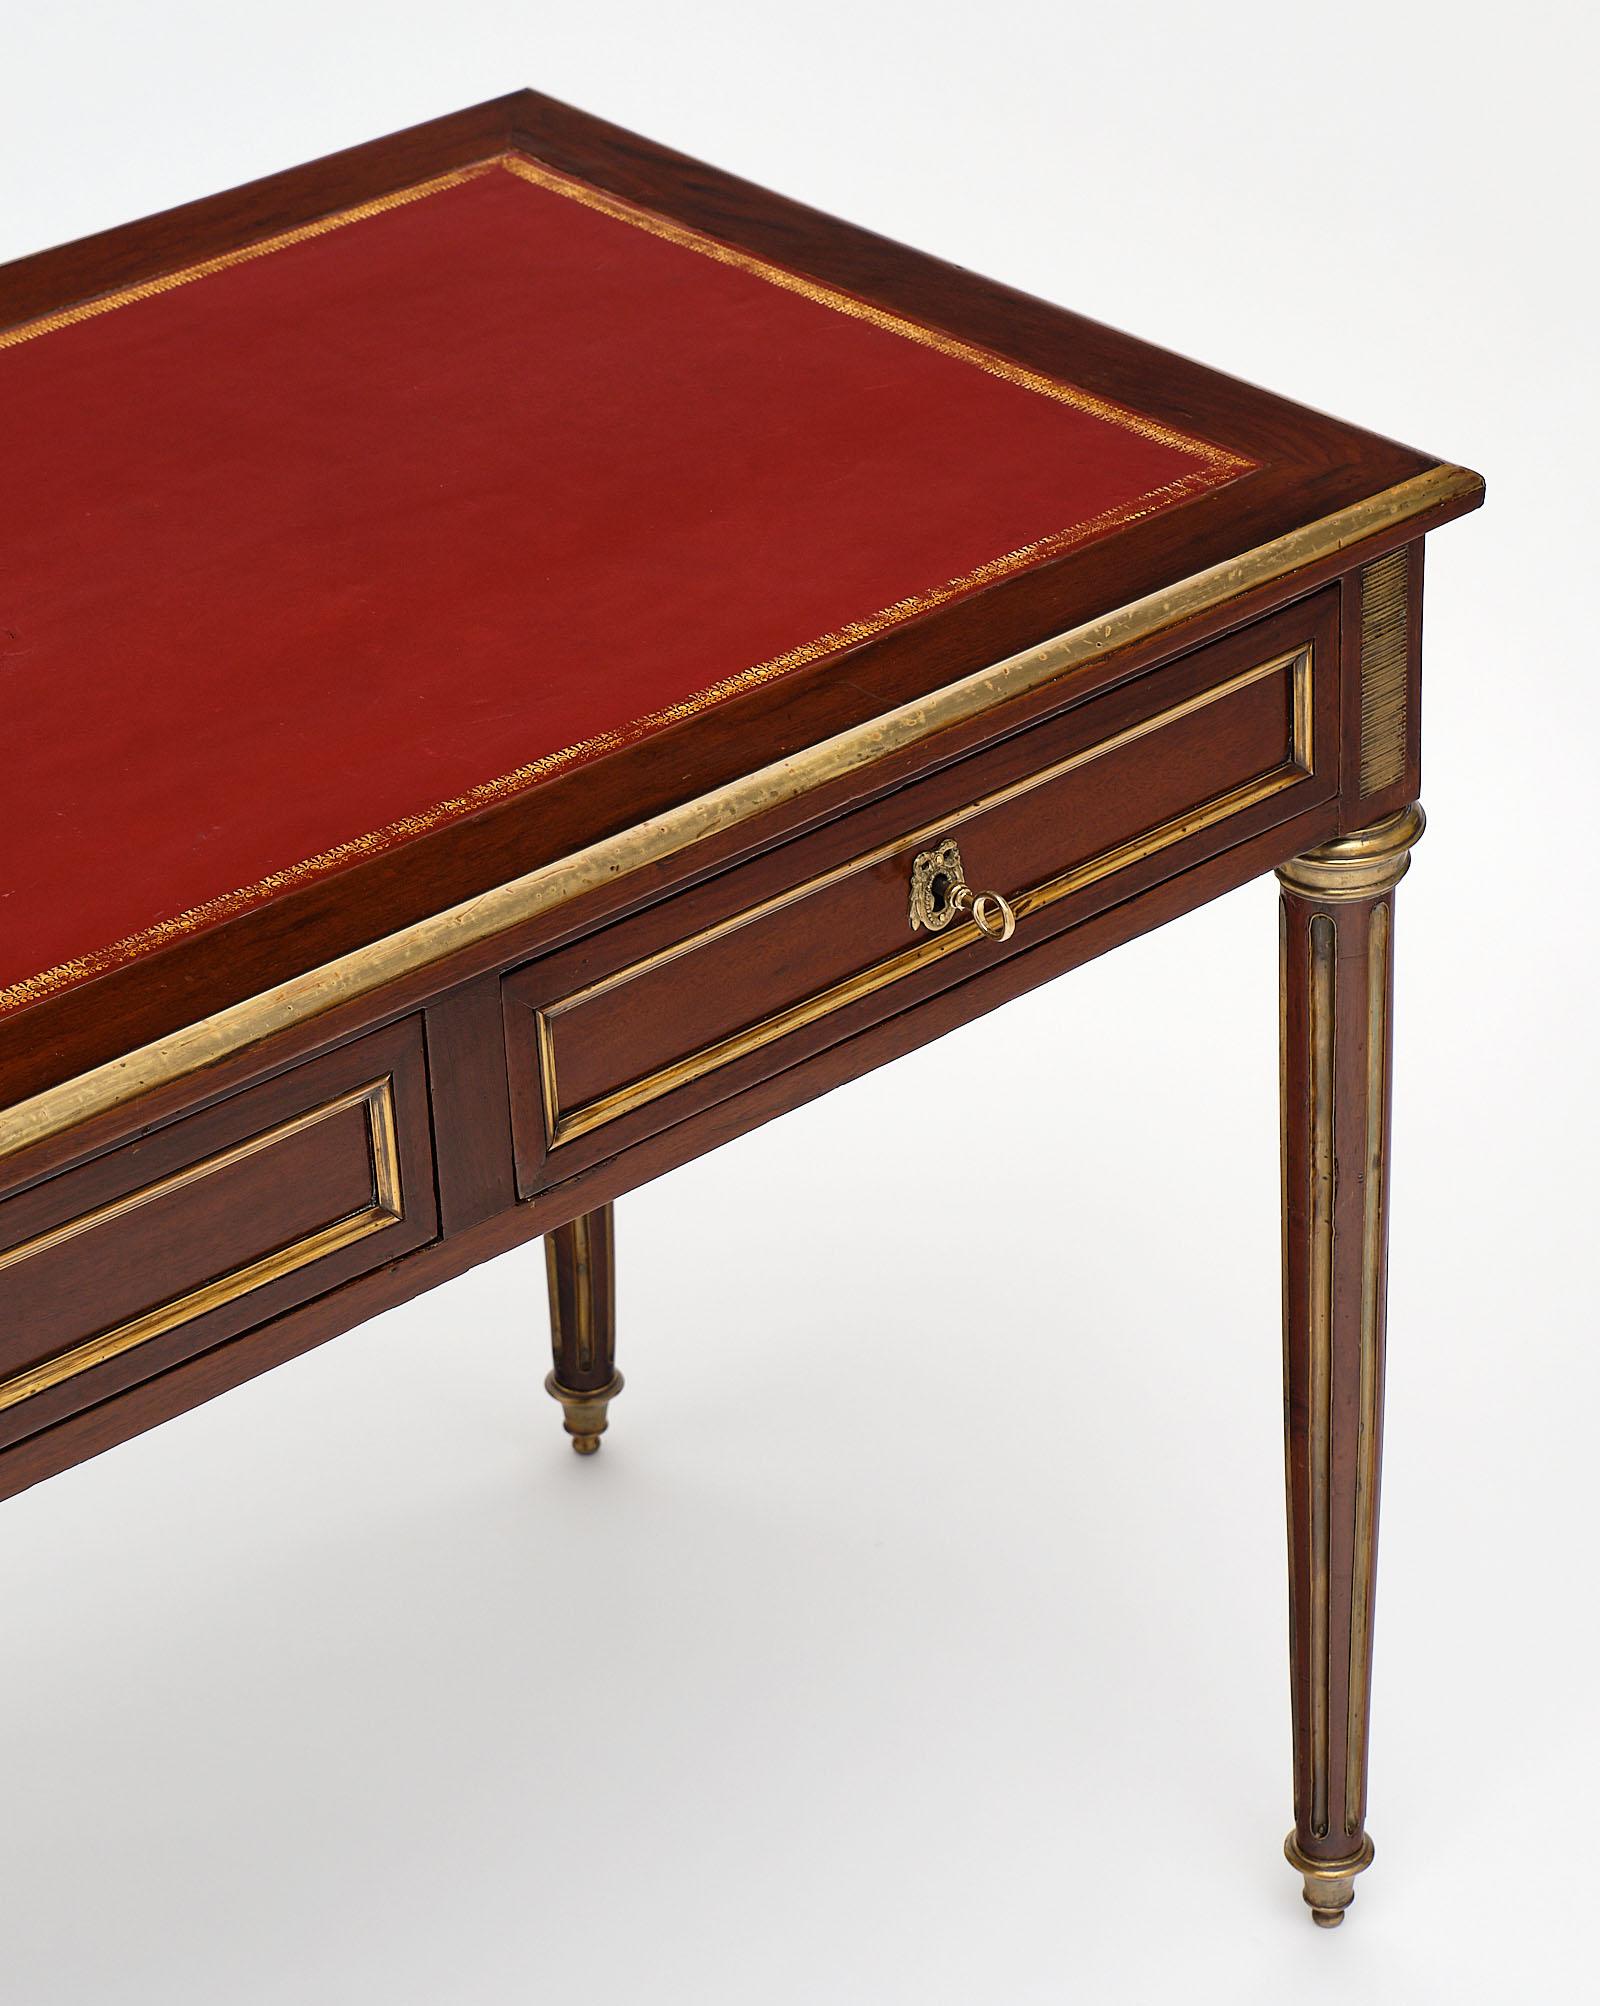 French Louis XVI style mahogany desk from the early 20th century, circa 1900. This piece has two drawers with working keys, fluted and tapered legs, brass trim throughout, and its original gold embossed leather top.